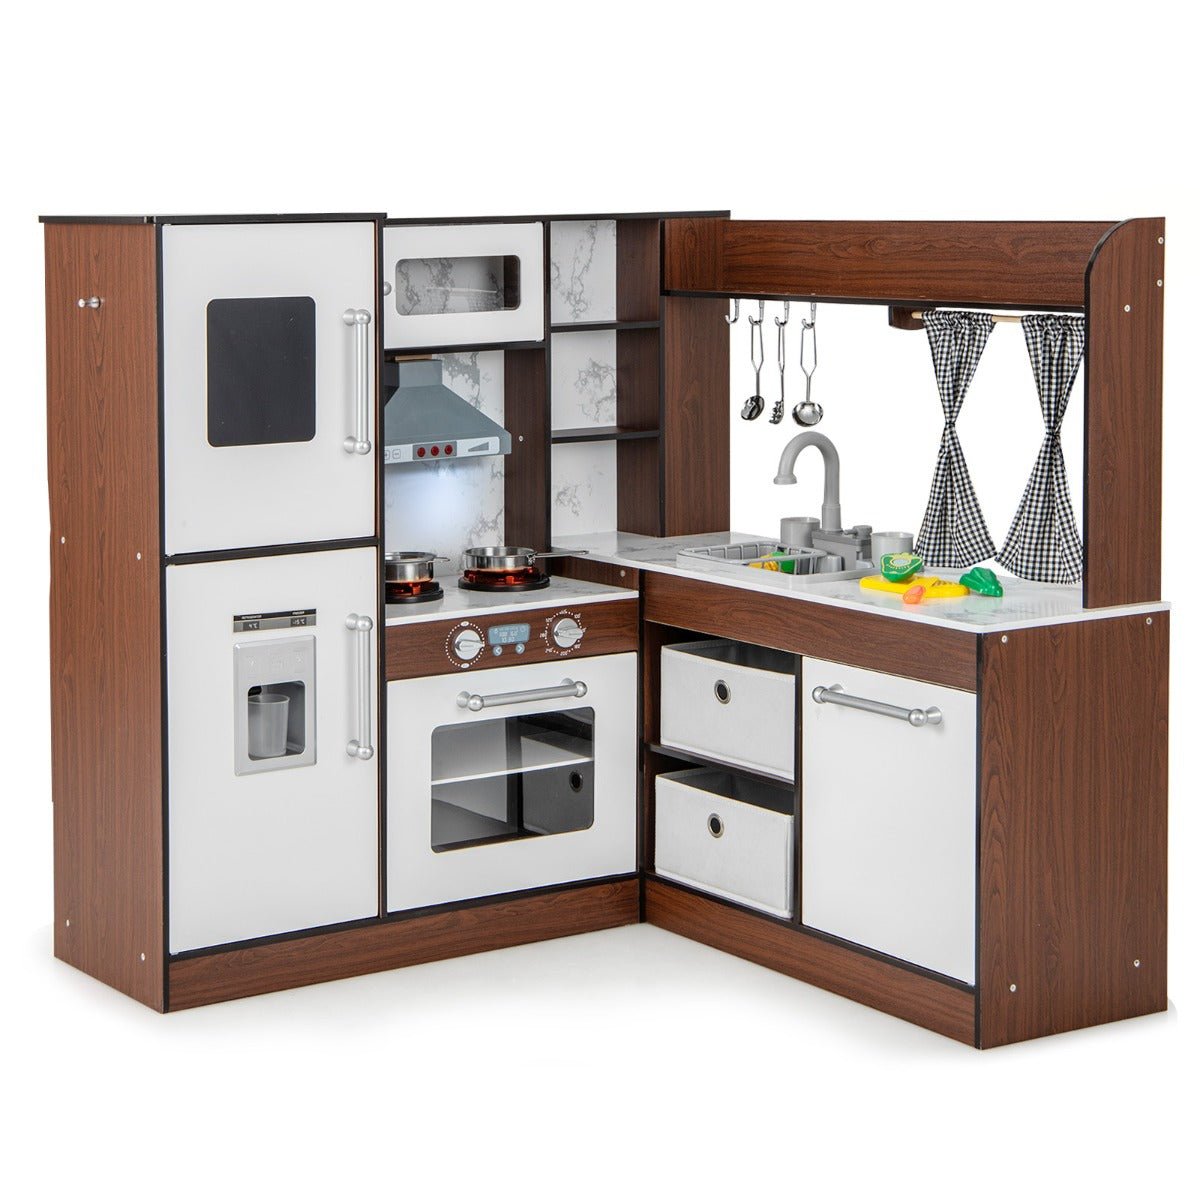 Fun with Lights: Wooden Play Kitchen